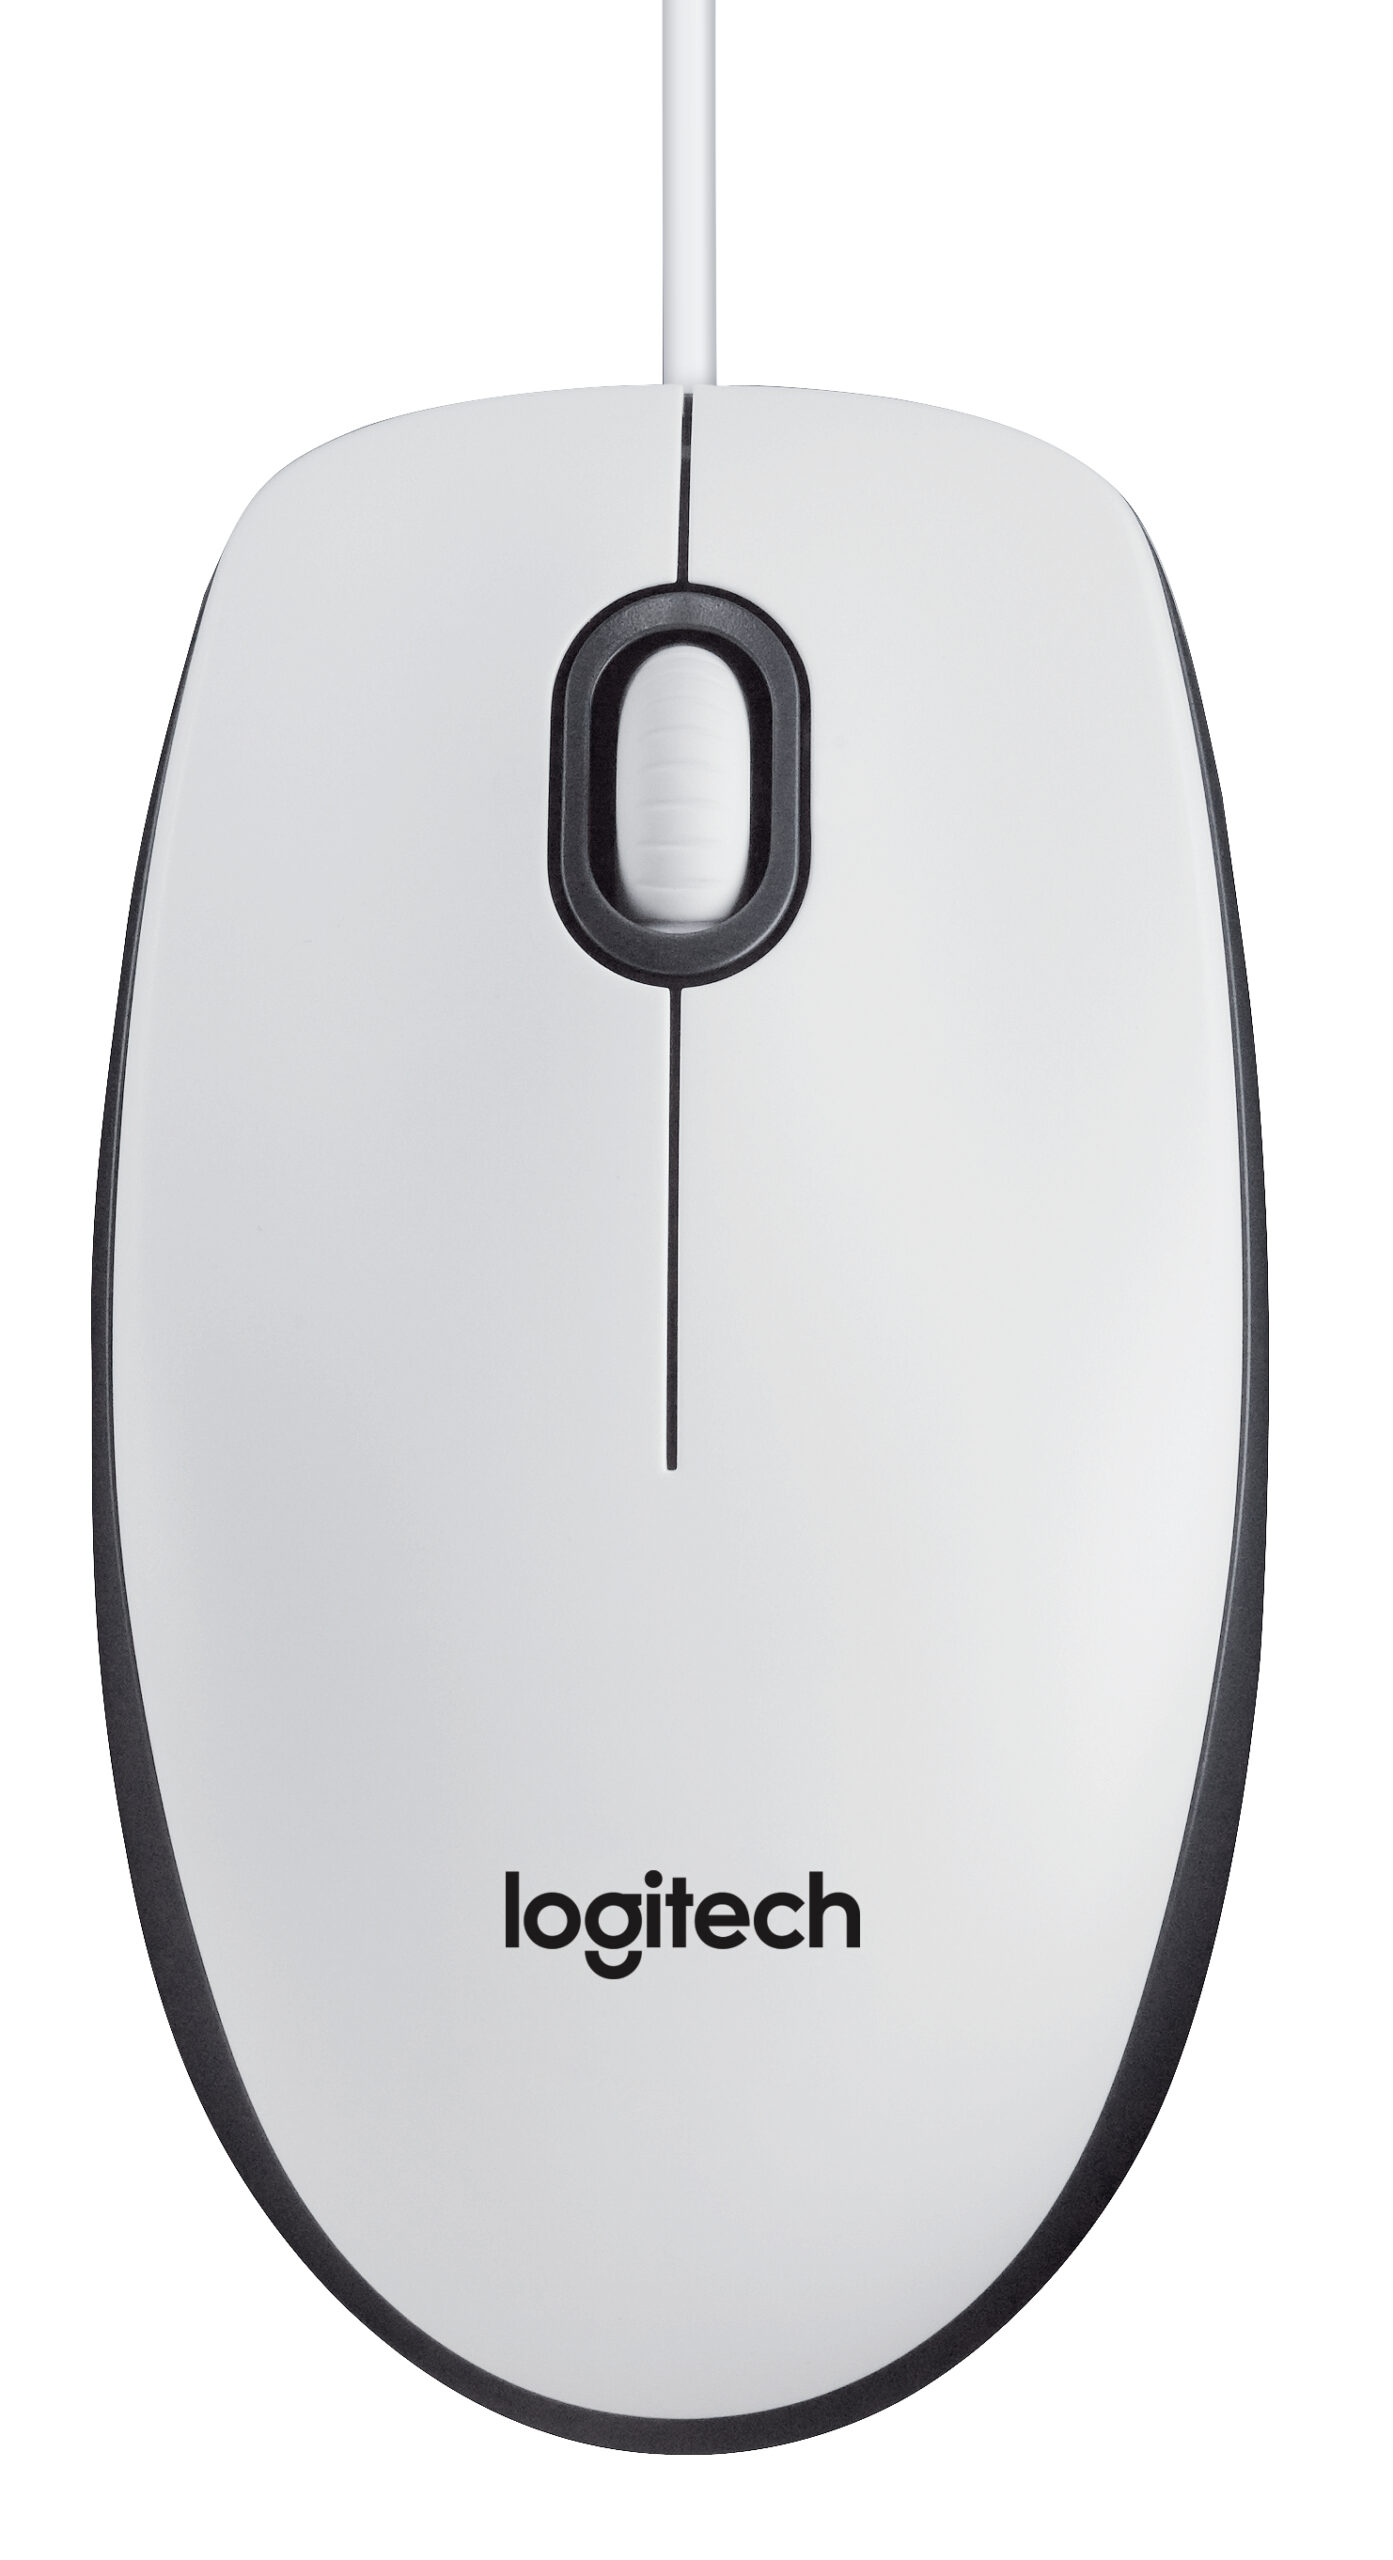 Mouse M100 White Wer Op Logitech Input Devices 910 001603 5099206019133